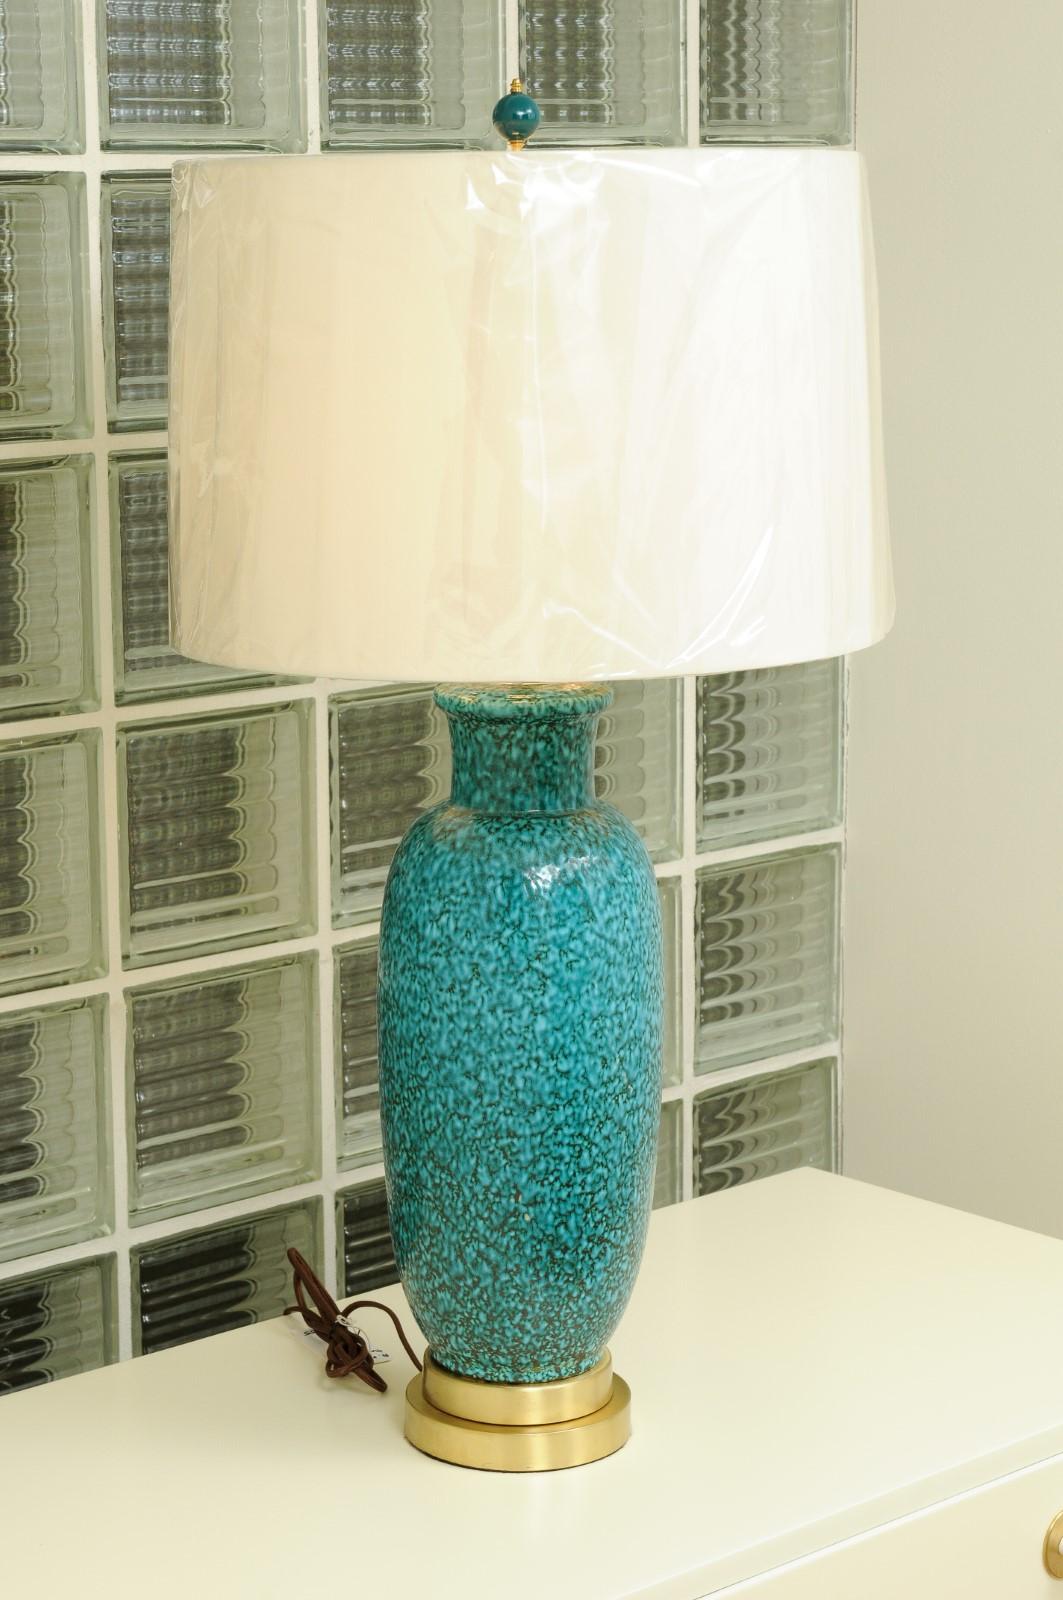 Exceptional Pair of Restored Italian Ceramic Lamps in Turquoise, circa 1960 For Sale 1